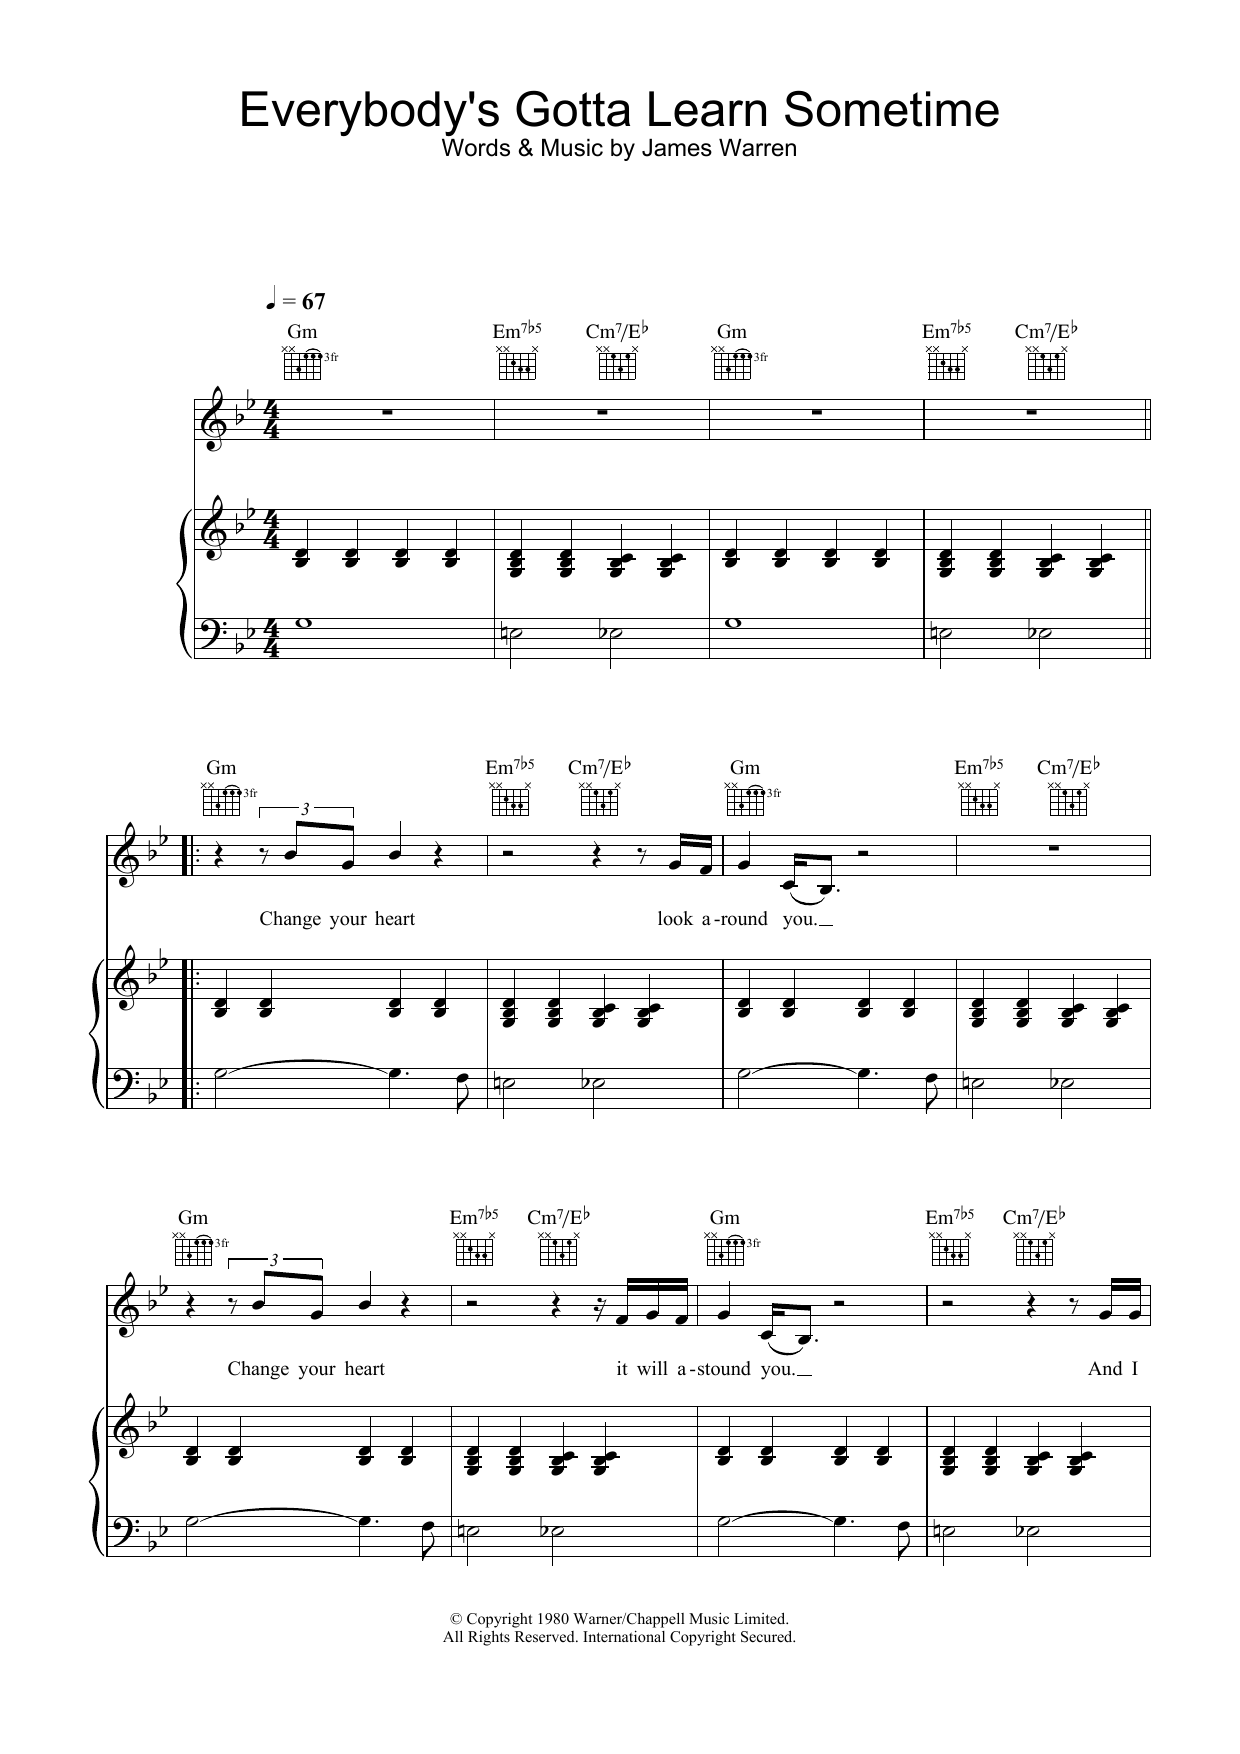 Download Beck Everybody's Gotta Learn Sometime (from Sheet Music